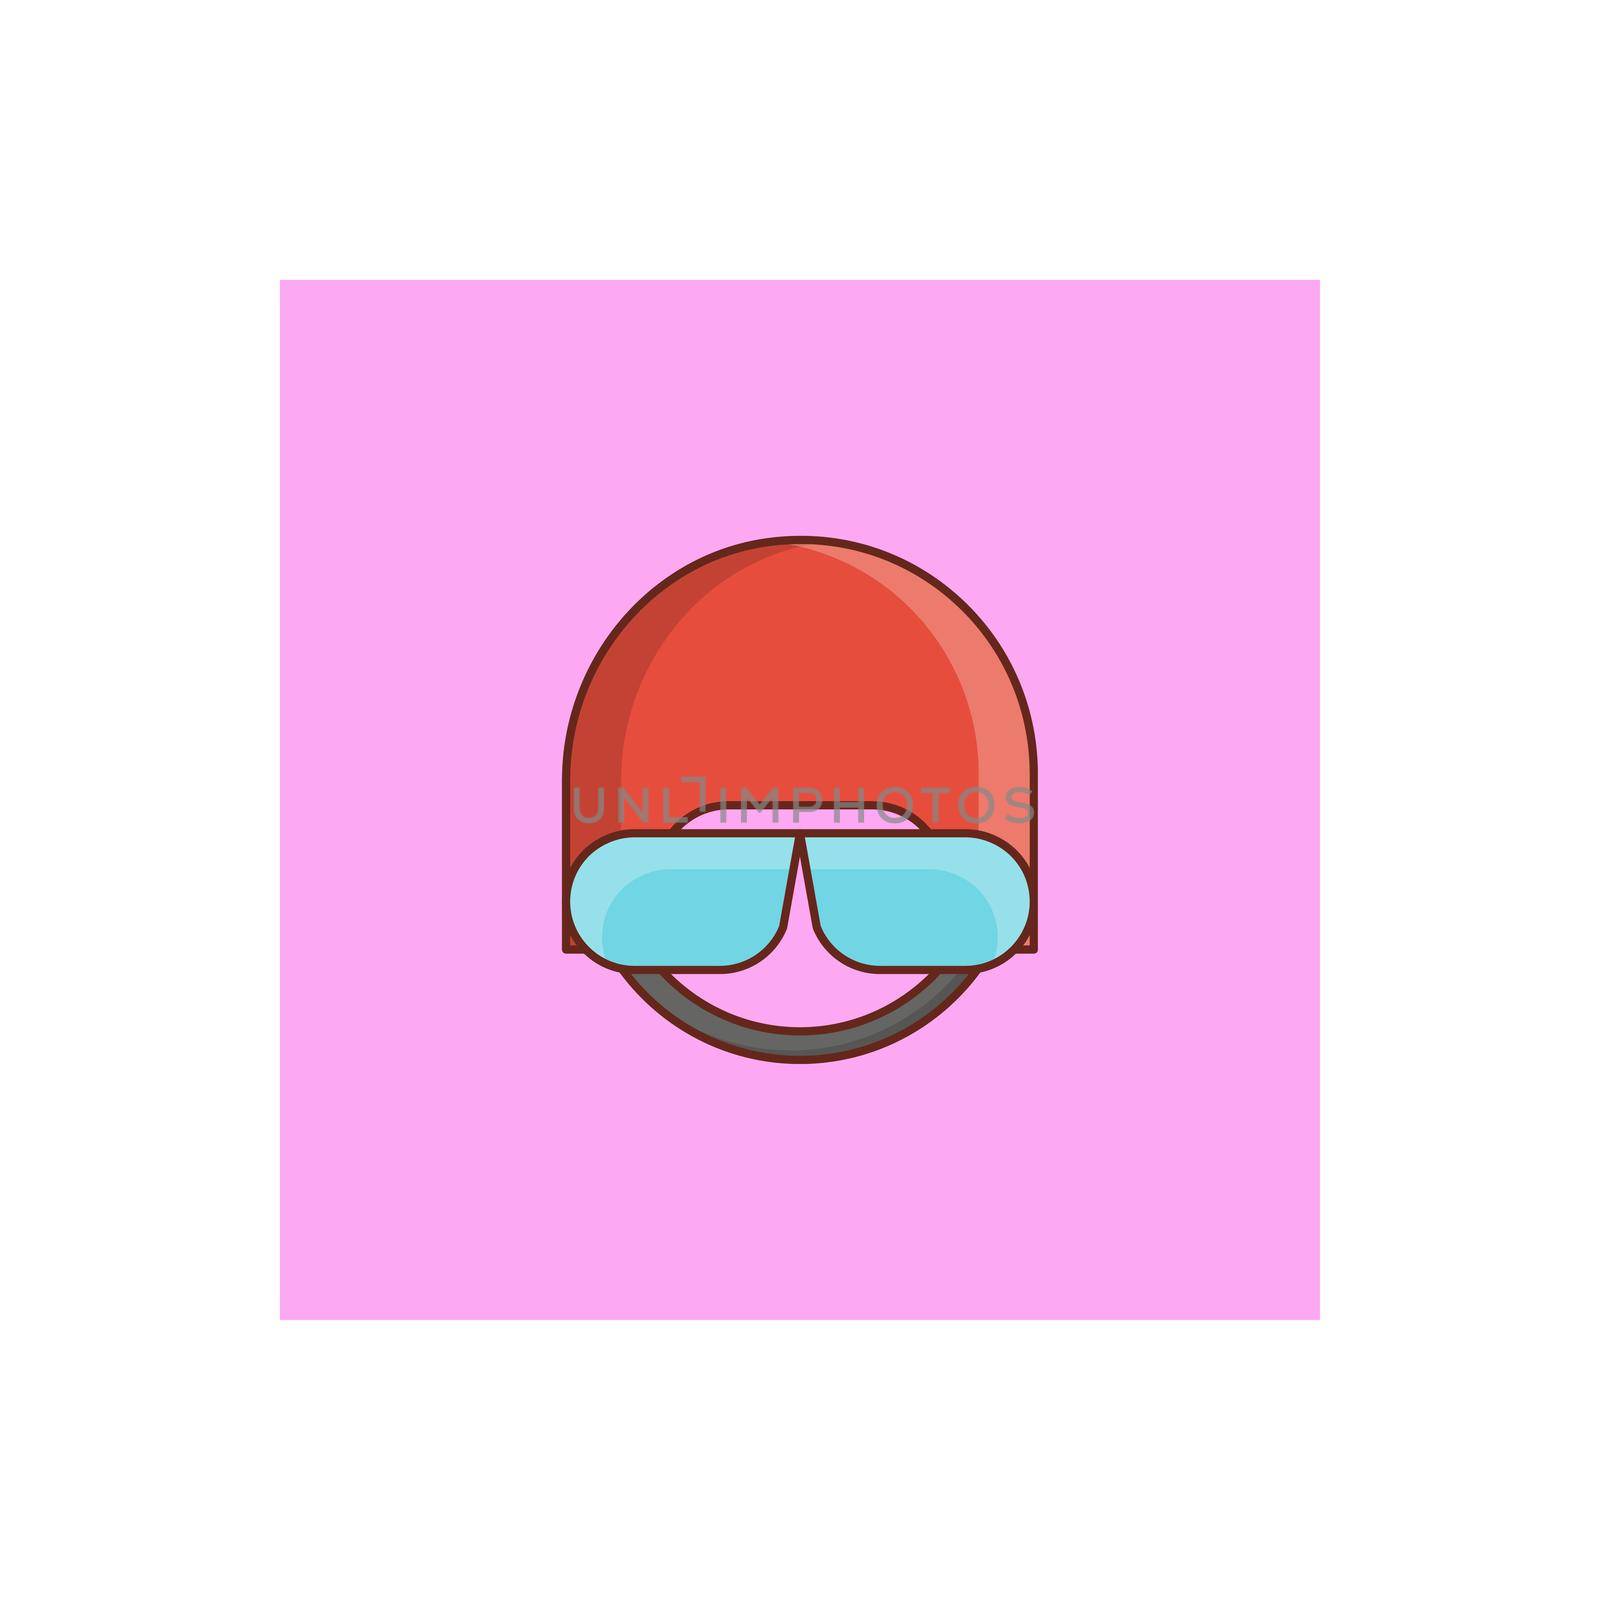 helmet Vector illustration on a transparent background. Premium quality symbols.Vector line flat color icon for concept and graphic design.